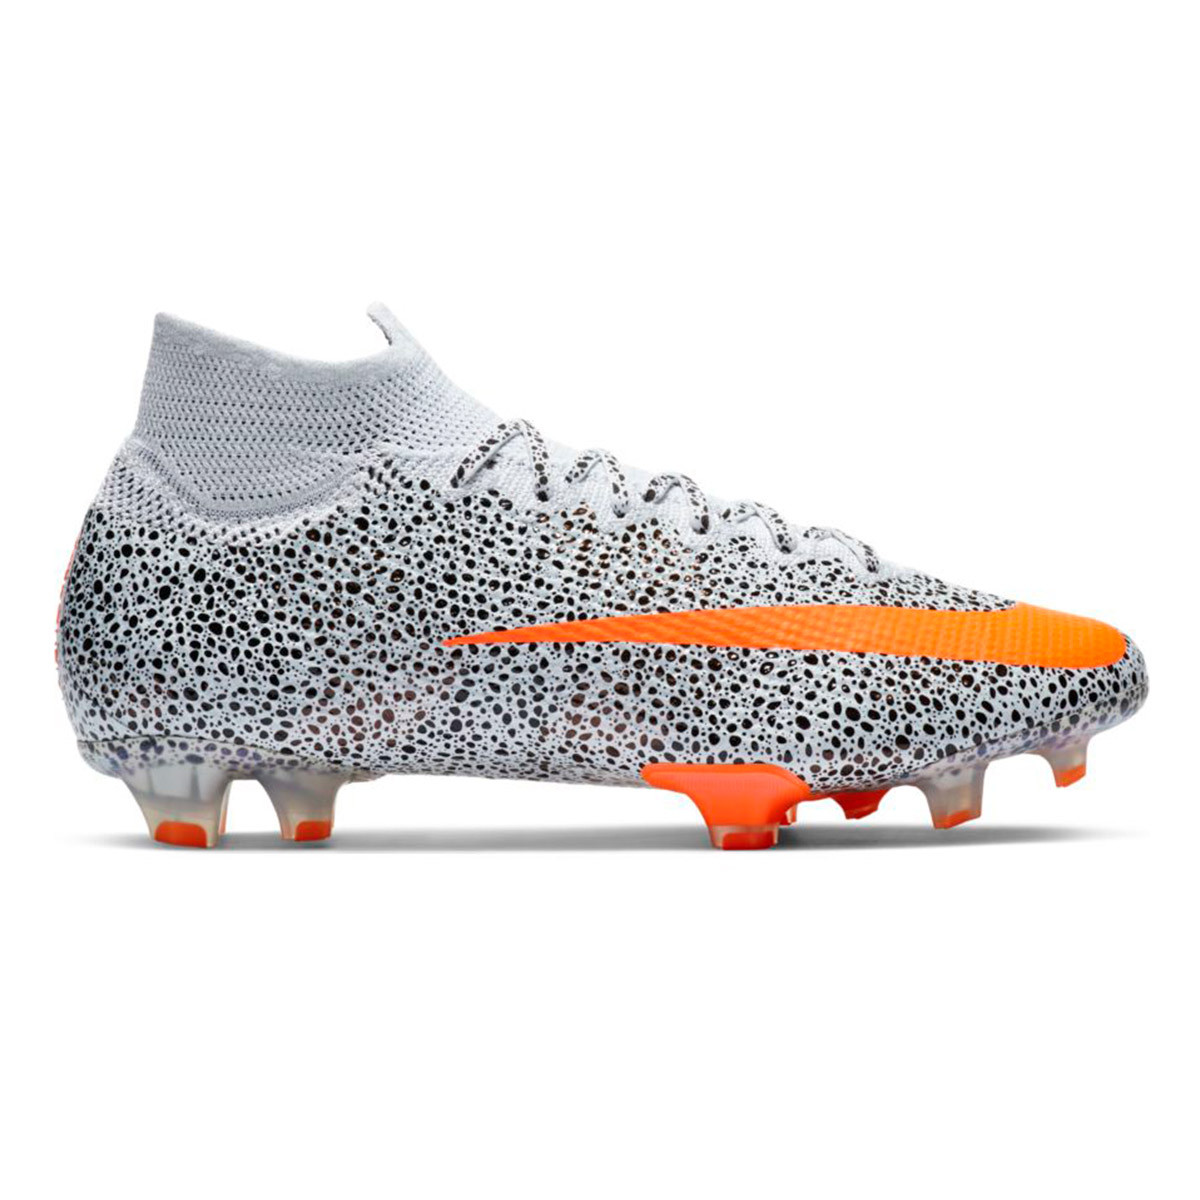 Nike Superfly 6 Elite FG Firm Ground Football Boot With.